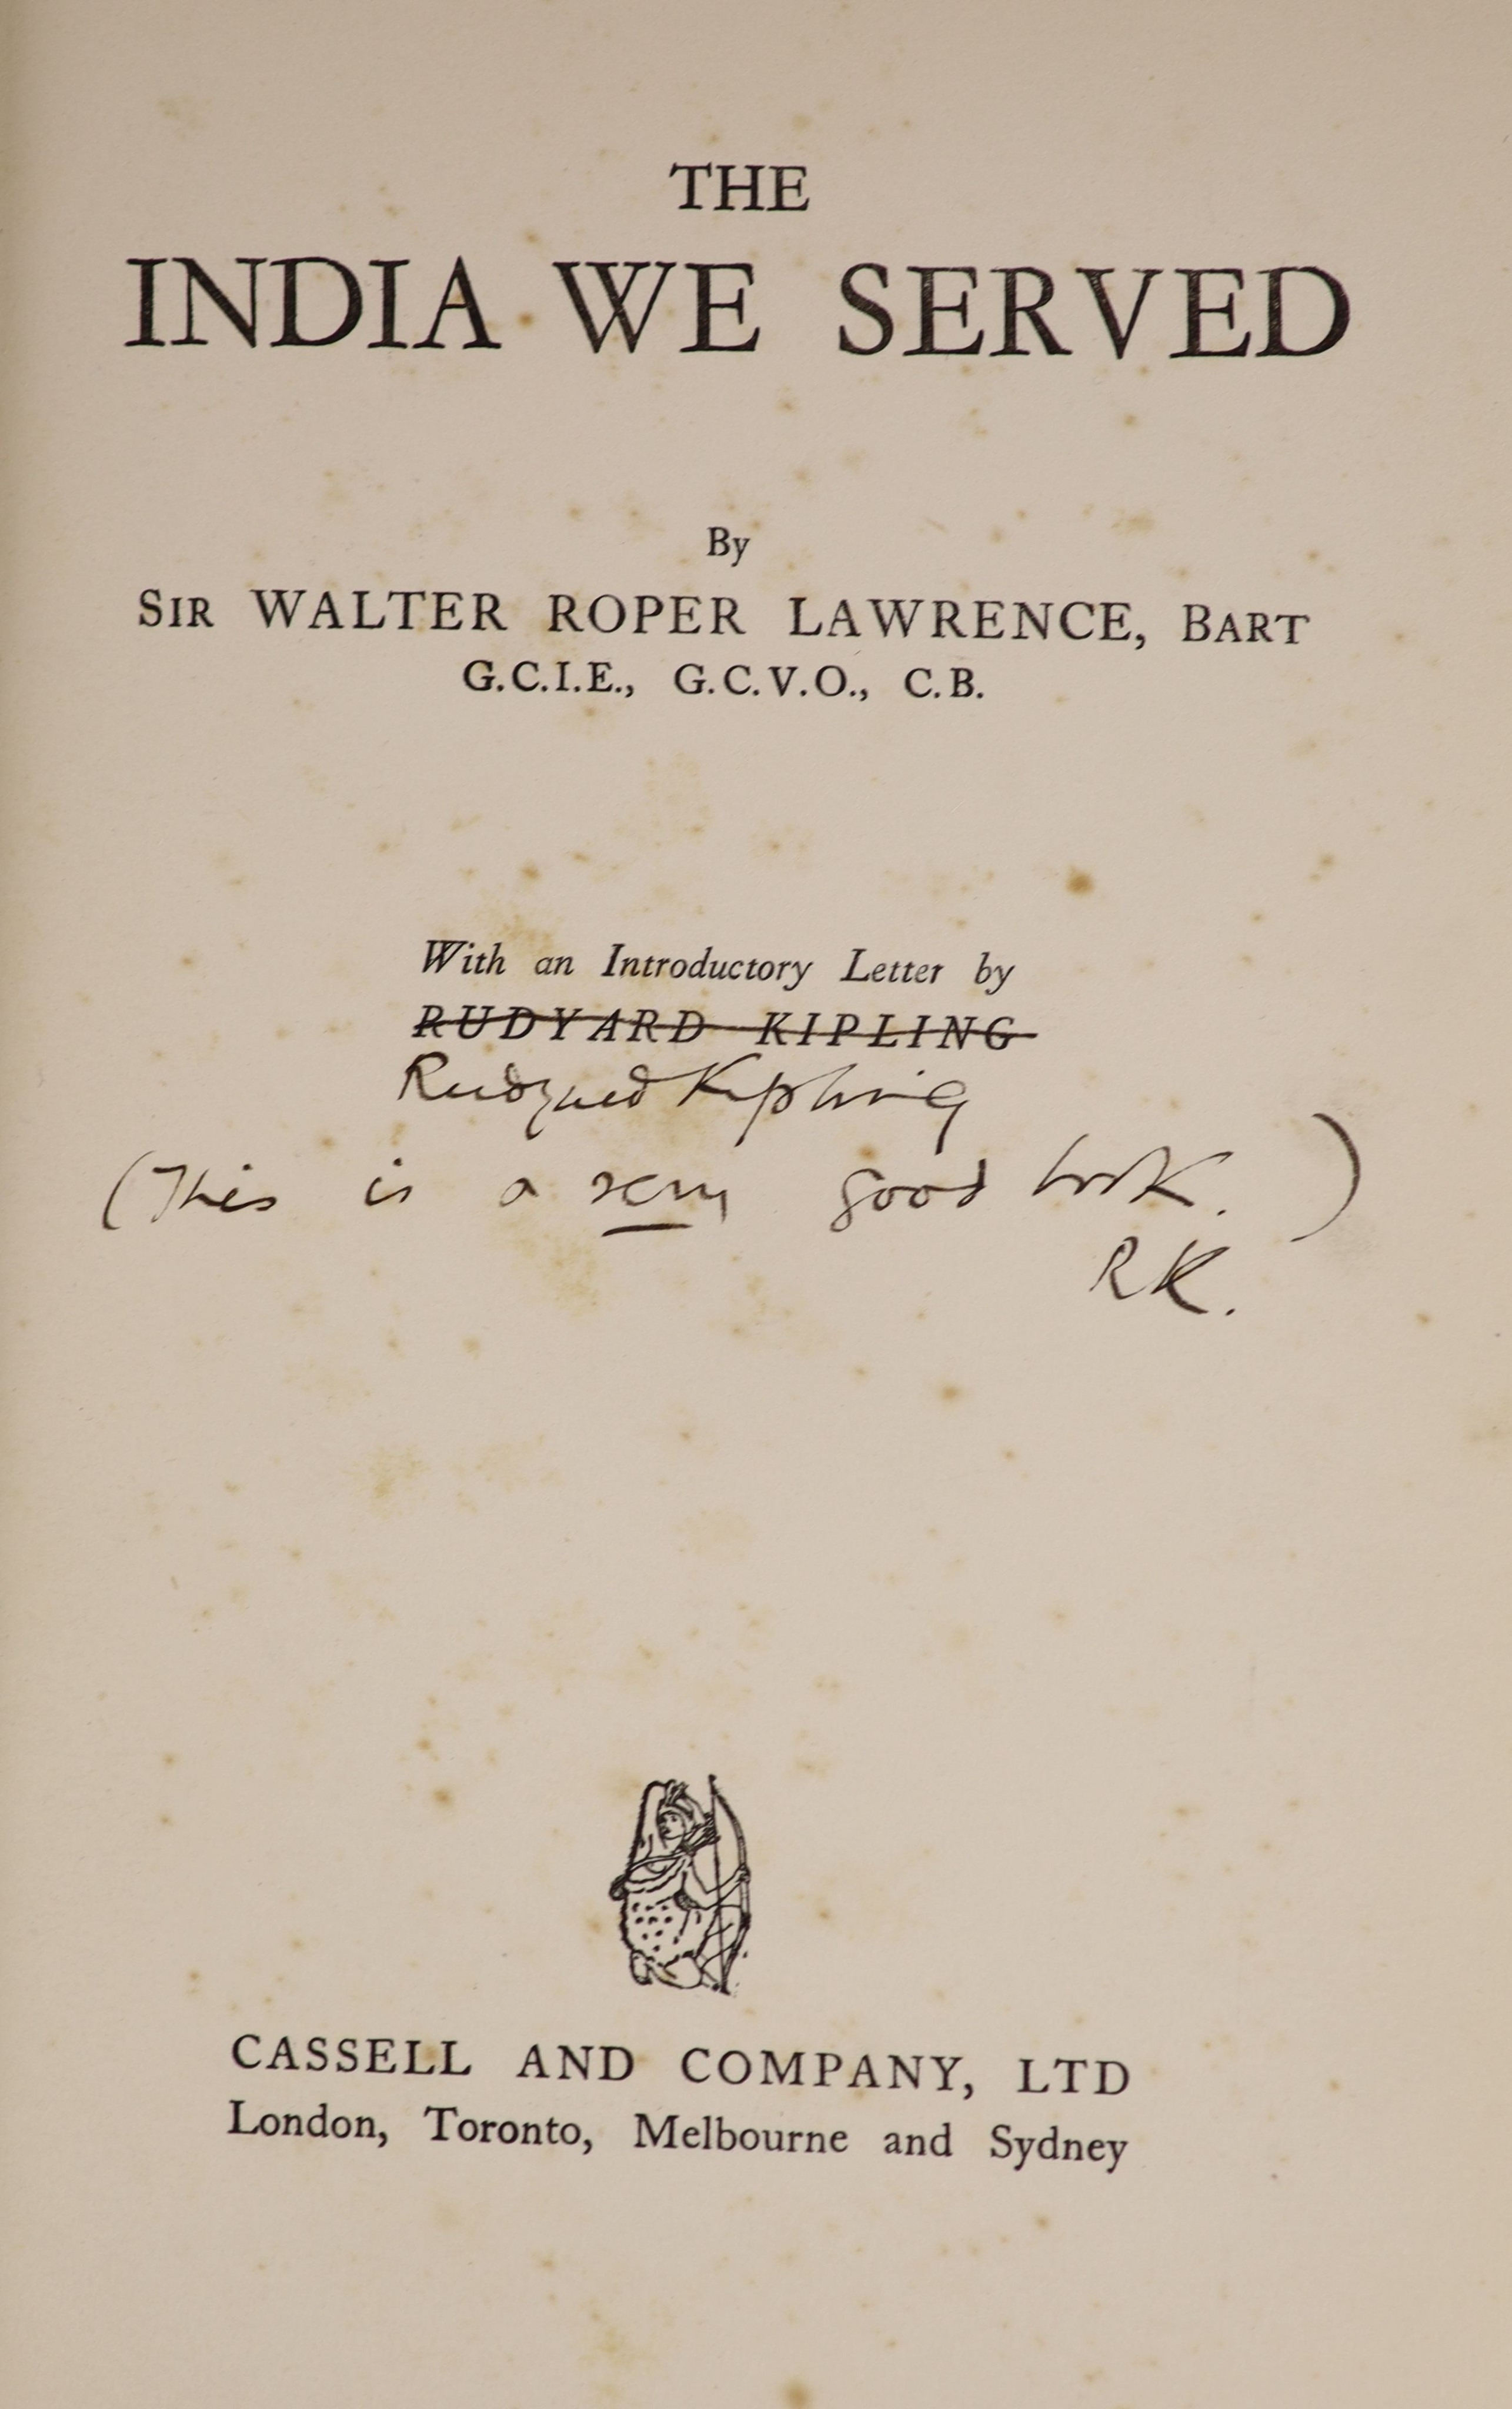 Lawrence, Sir Walter Roper - The India We Served, 8vo, quarter cloth, with d/j, introductory letter by Rudyard Kipling, the title alerted in pen and ink by same, reading ‘’Rudyard Kipling, - This is a very good work. RK’